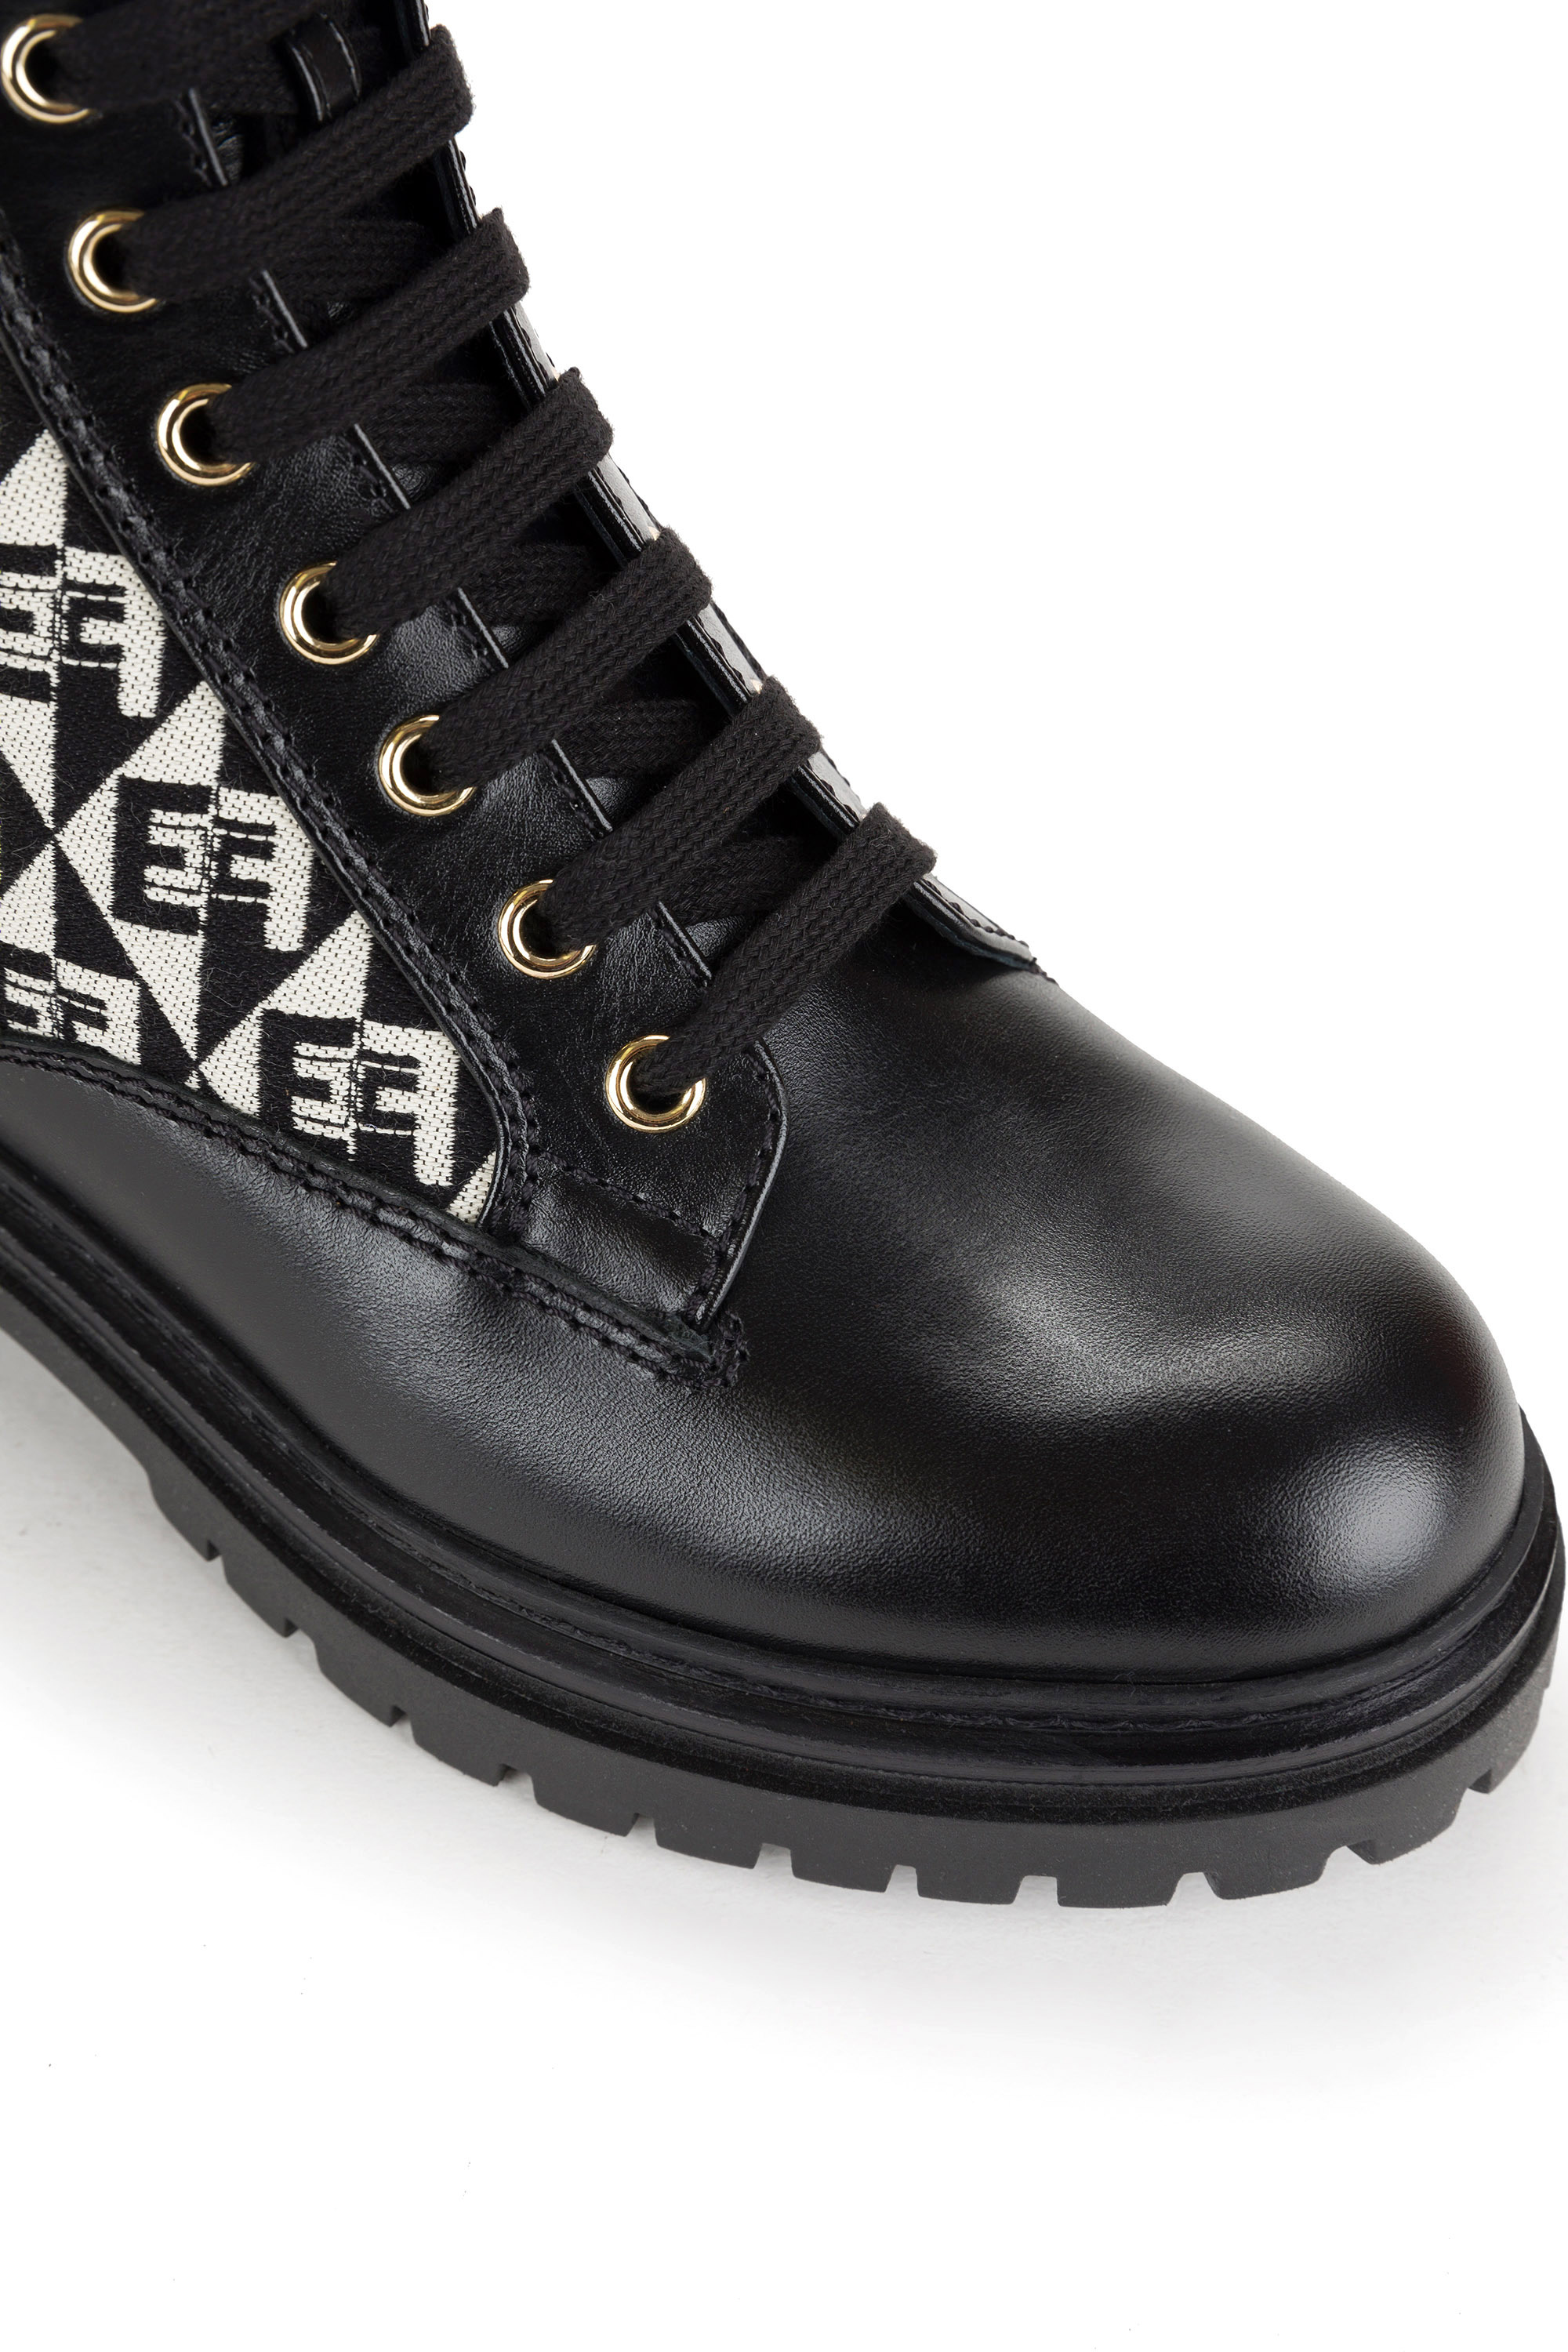 Biker boots in jacquard and leather with diamond pattern